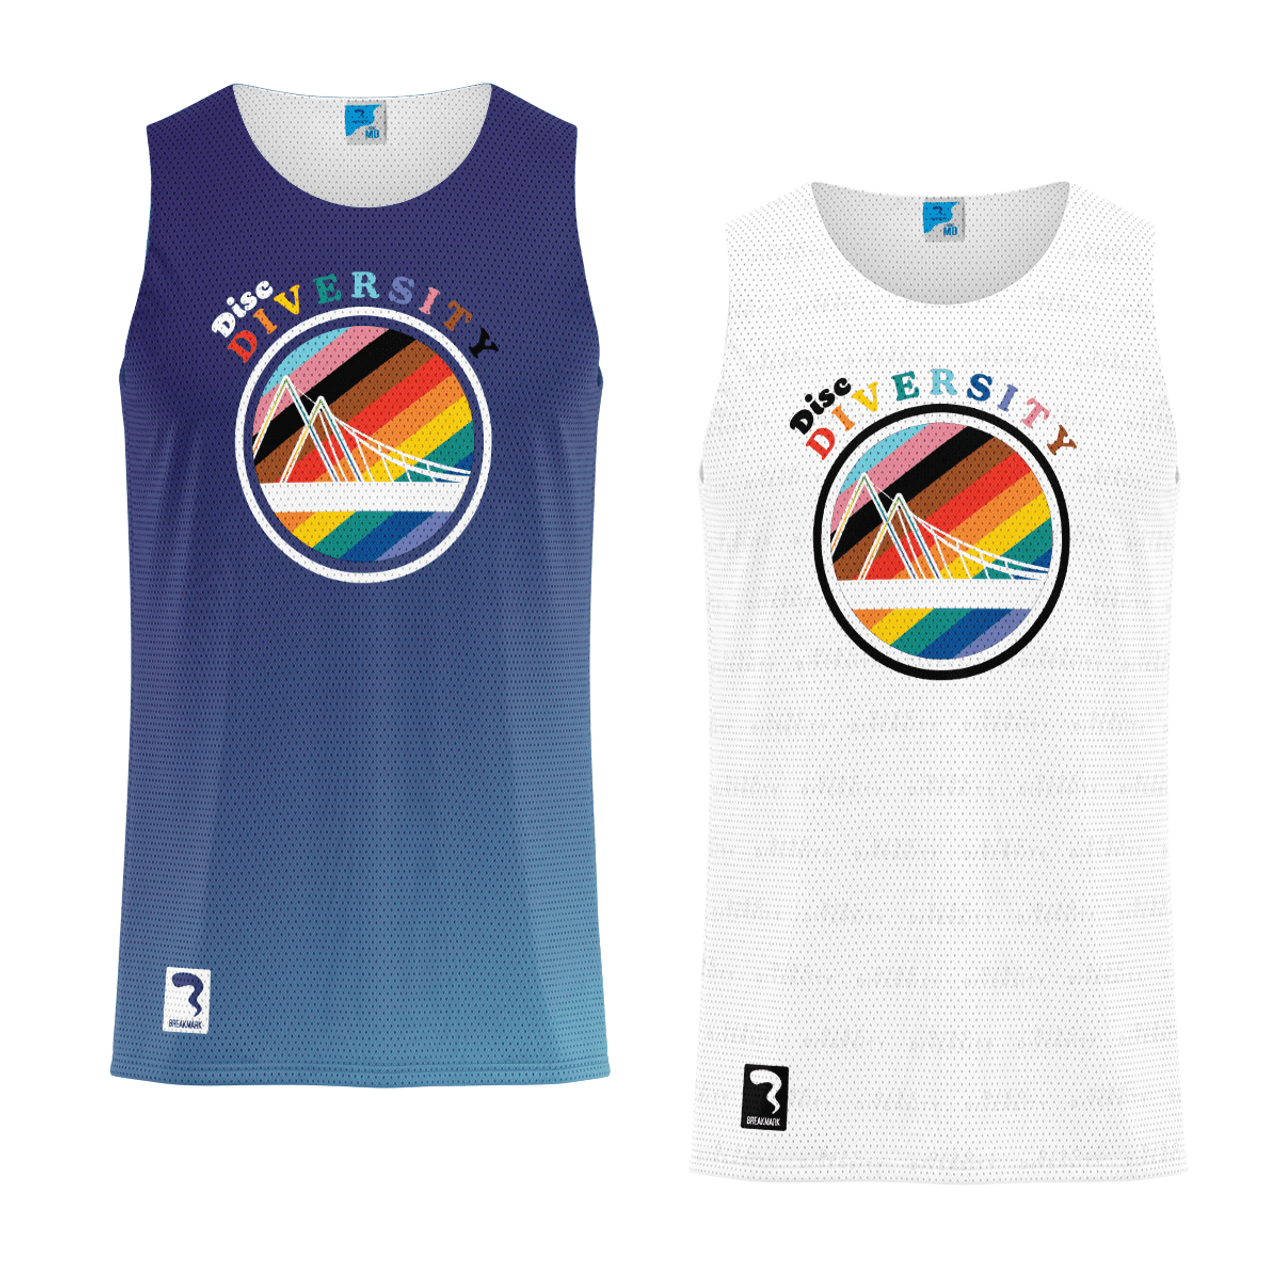 BS+COMPETITION ZEBRA JERSEY PRIDE